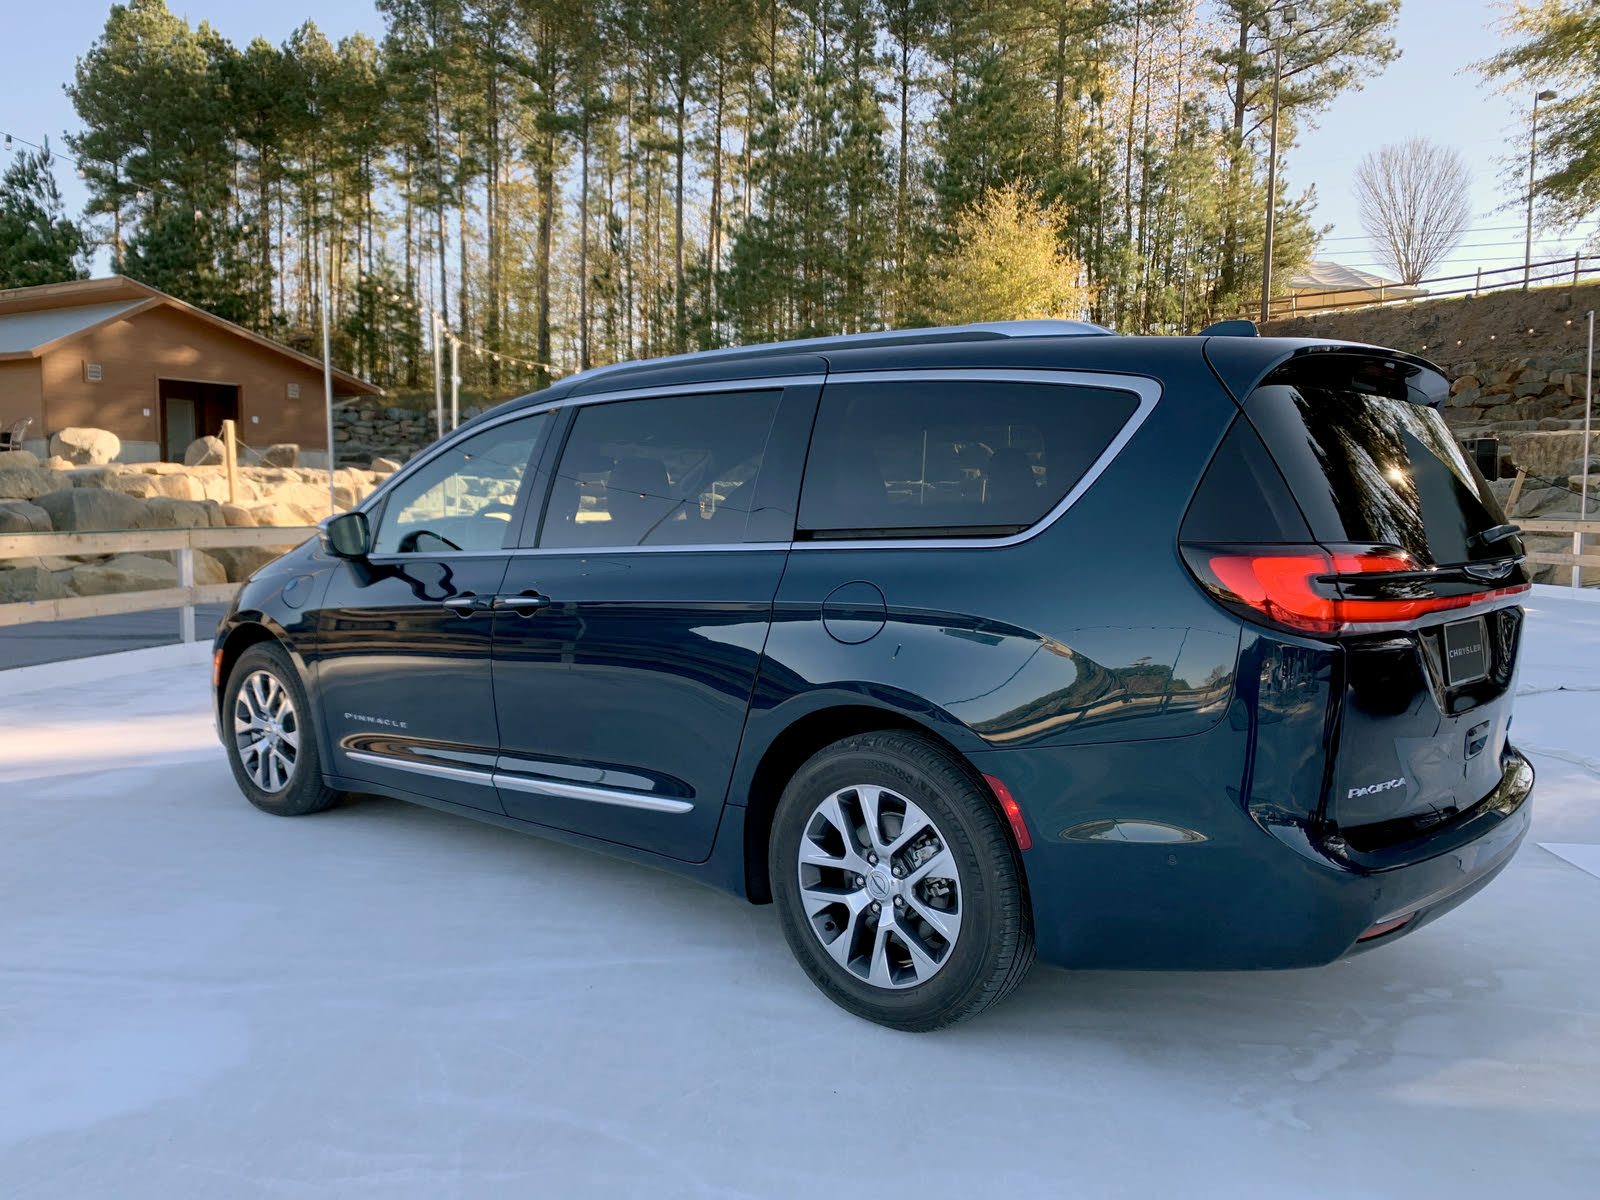 2021 Chrysler Pacifica Test Drive Review